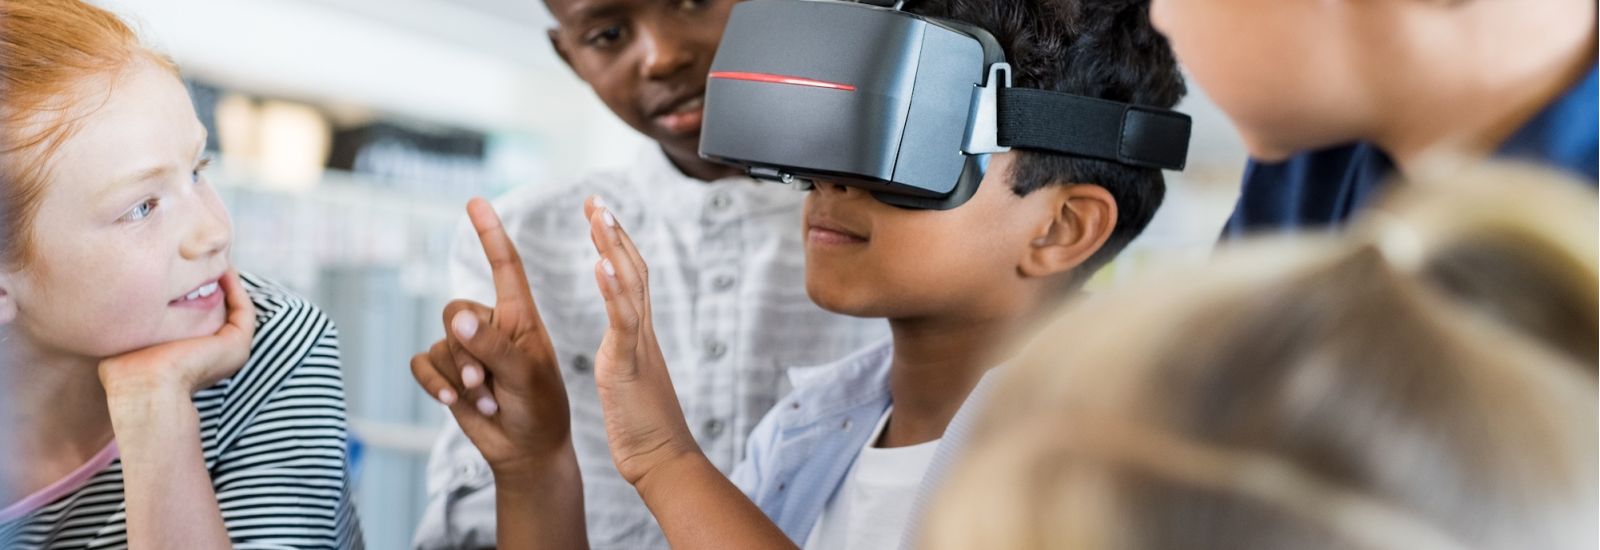 Mixed race child with vr virtual reality goggles in classroom with his friends.